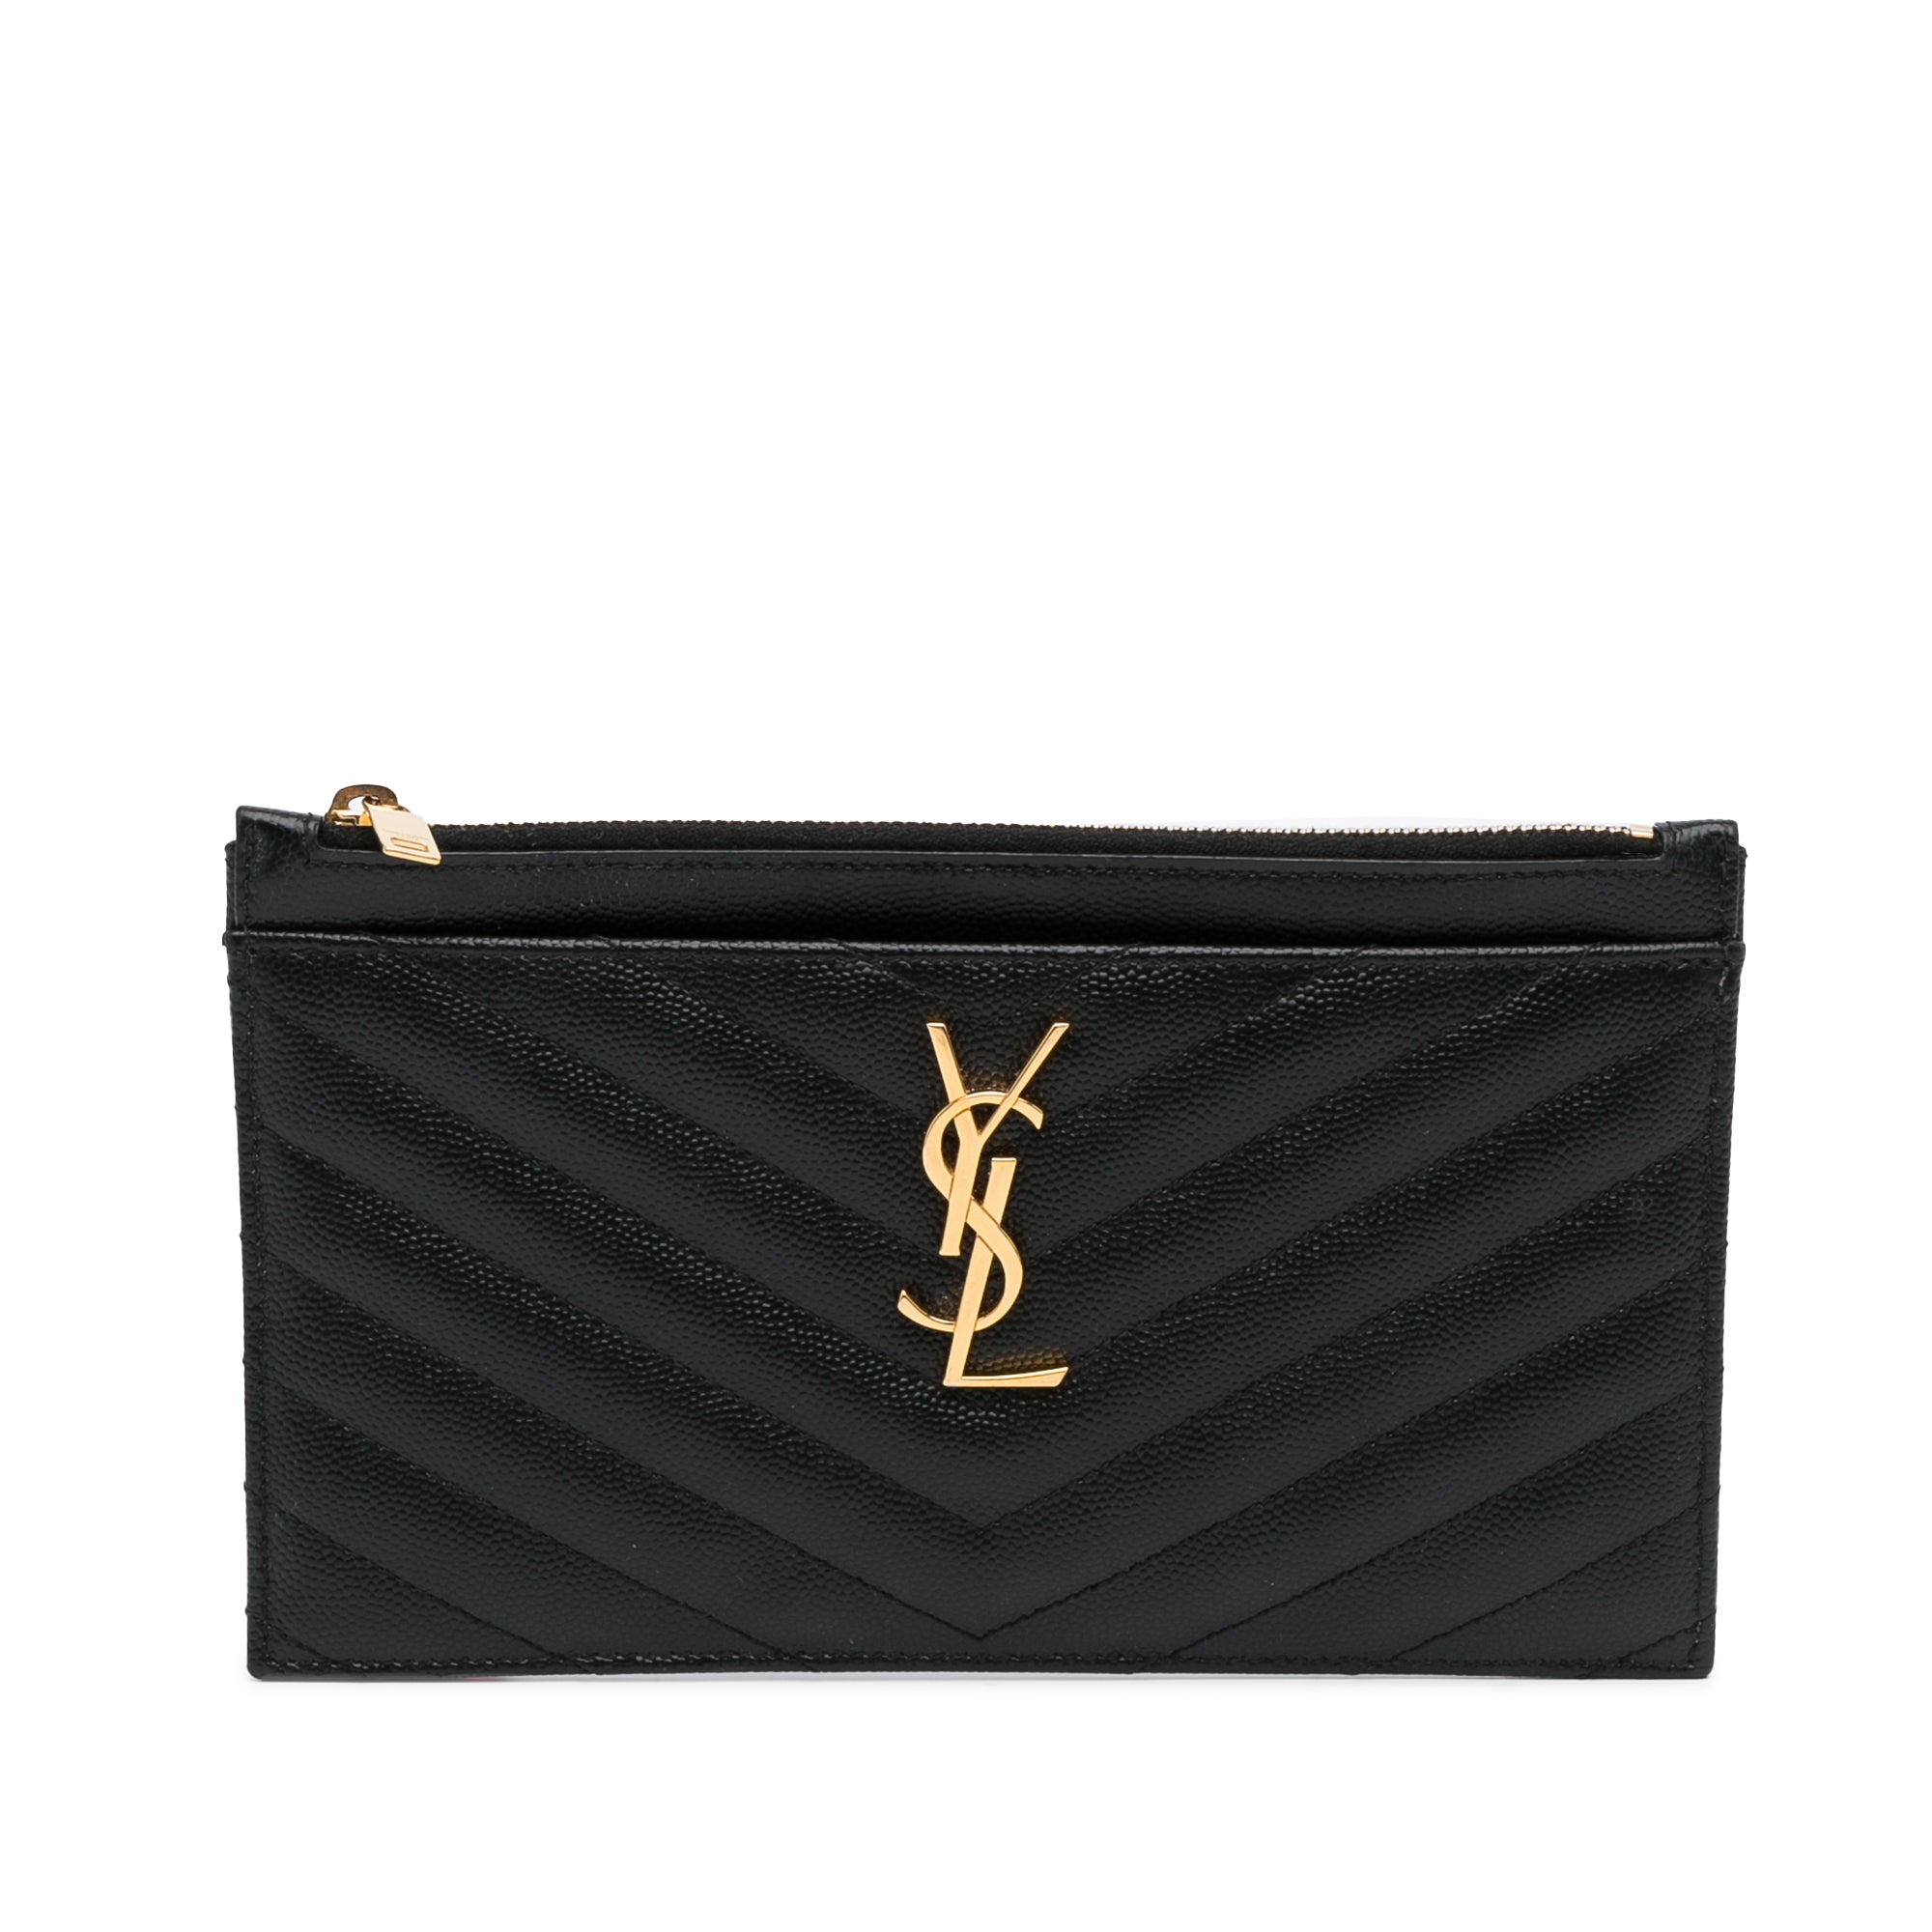 Saint Laurent Ysl Logo Quilted Leather Wallet On Chain Bag In Dark